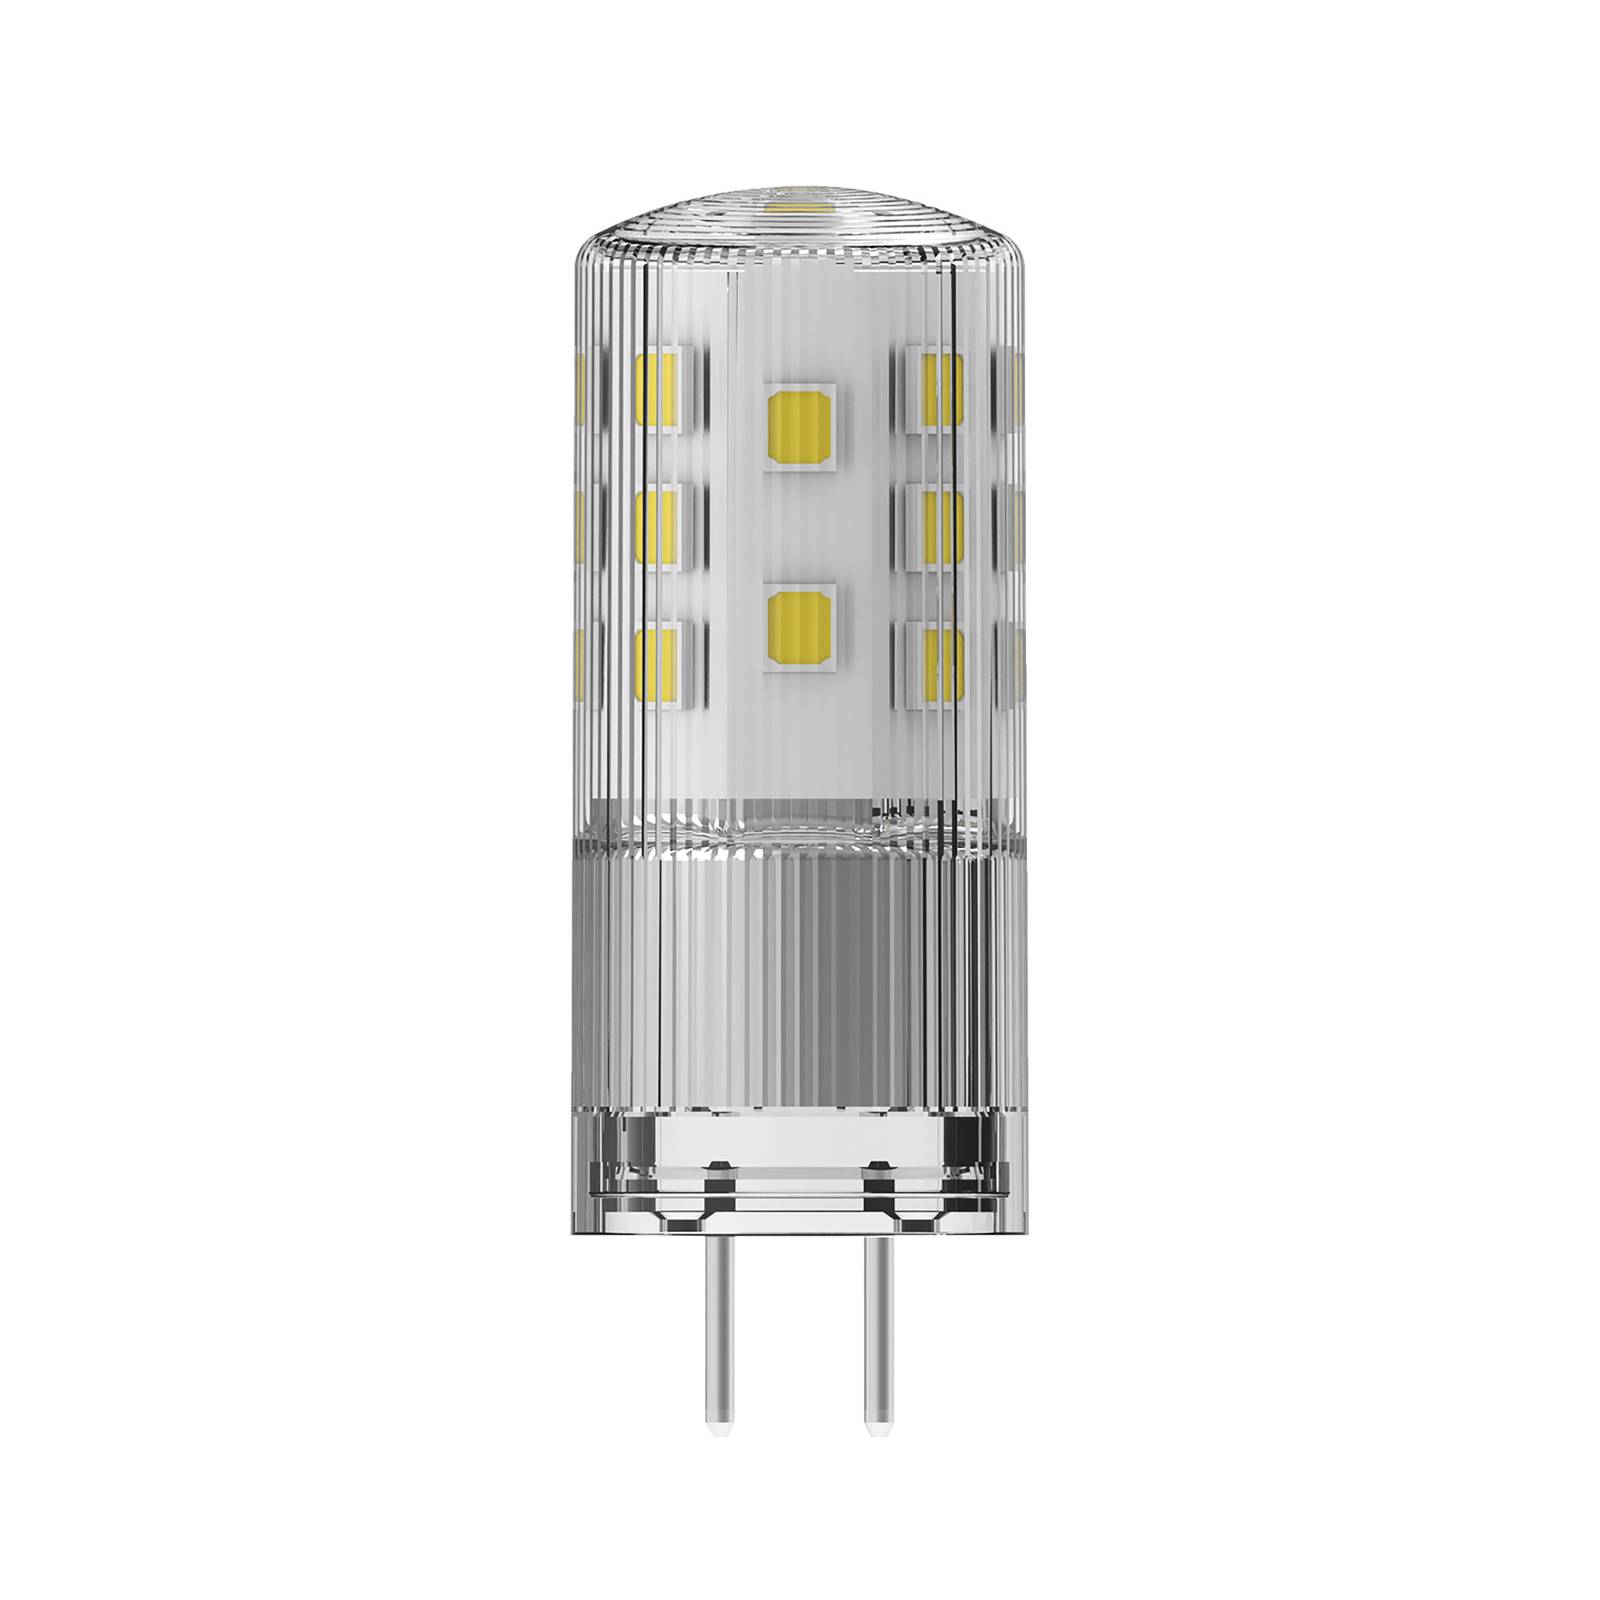 Image of Radium LED Star PIN GY6.35 4,5W 470lm dimmable 12V 4008597198311